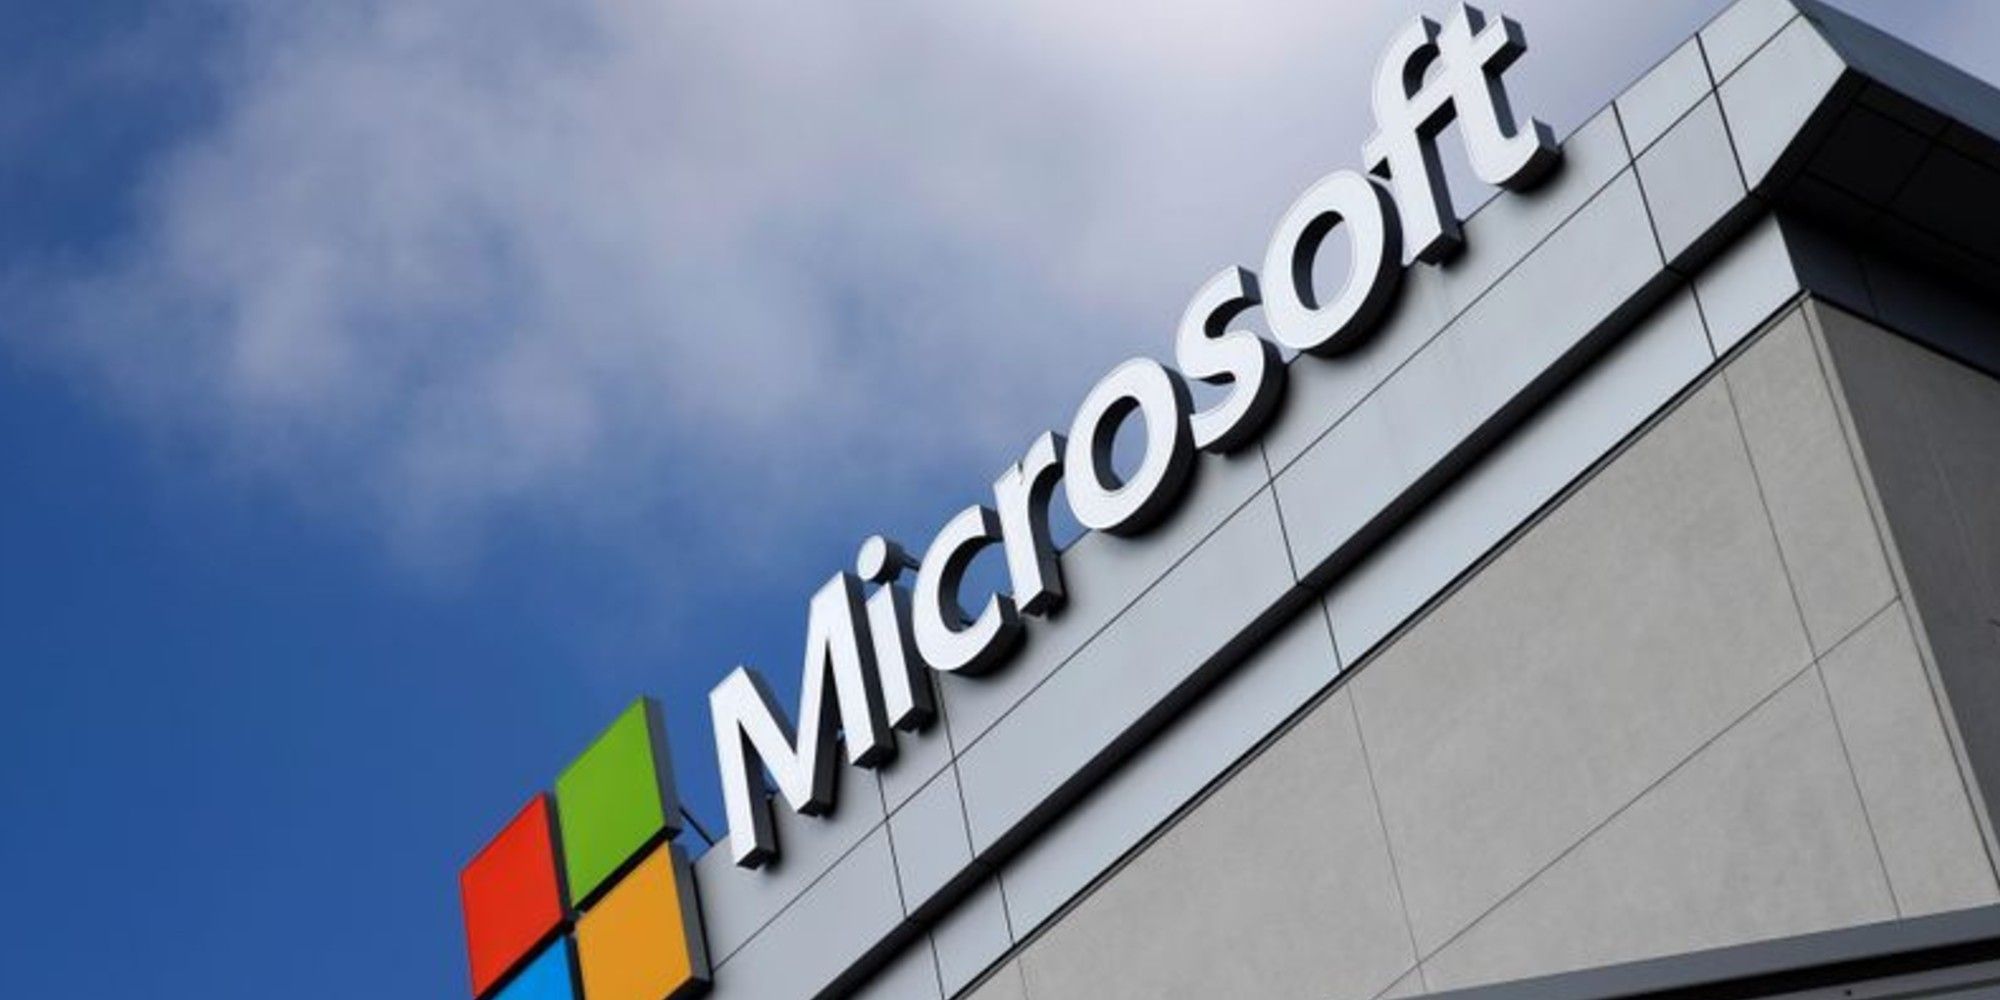 Microsoft Study Shows Growth In Online Risks That Sow Hate & Division